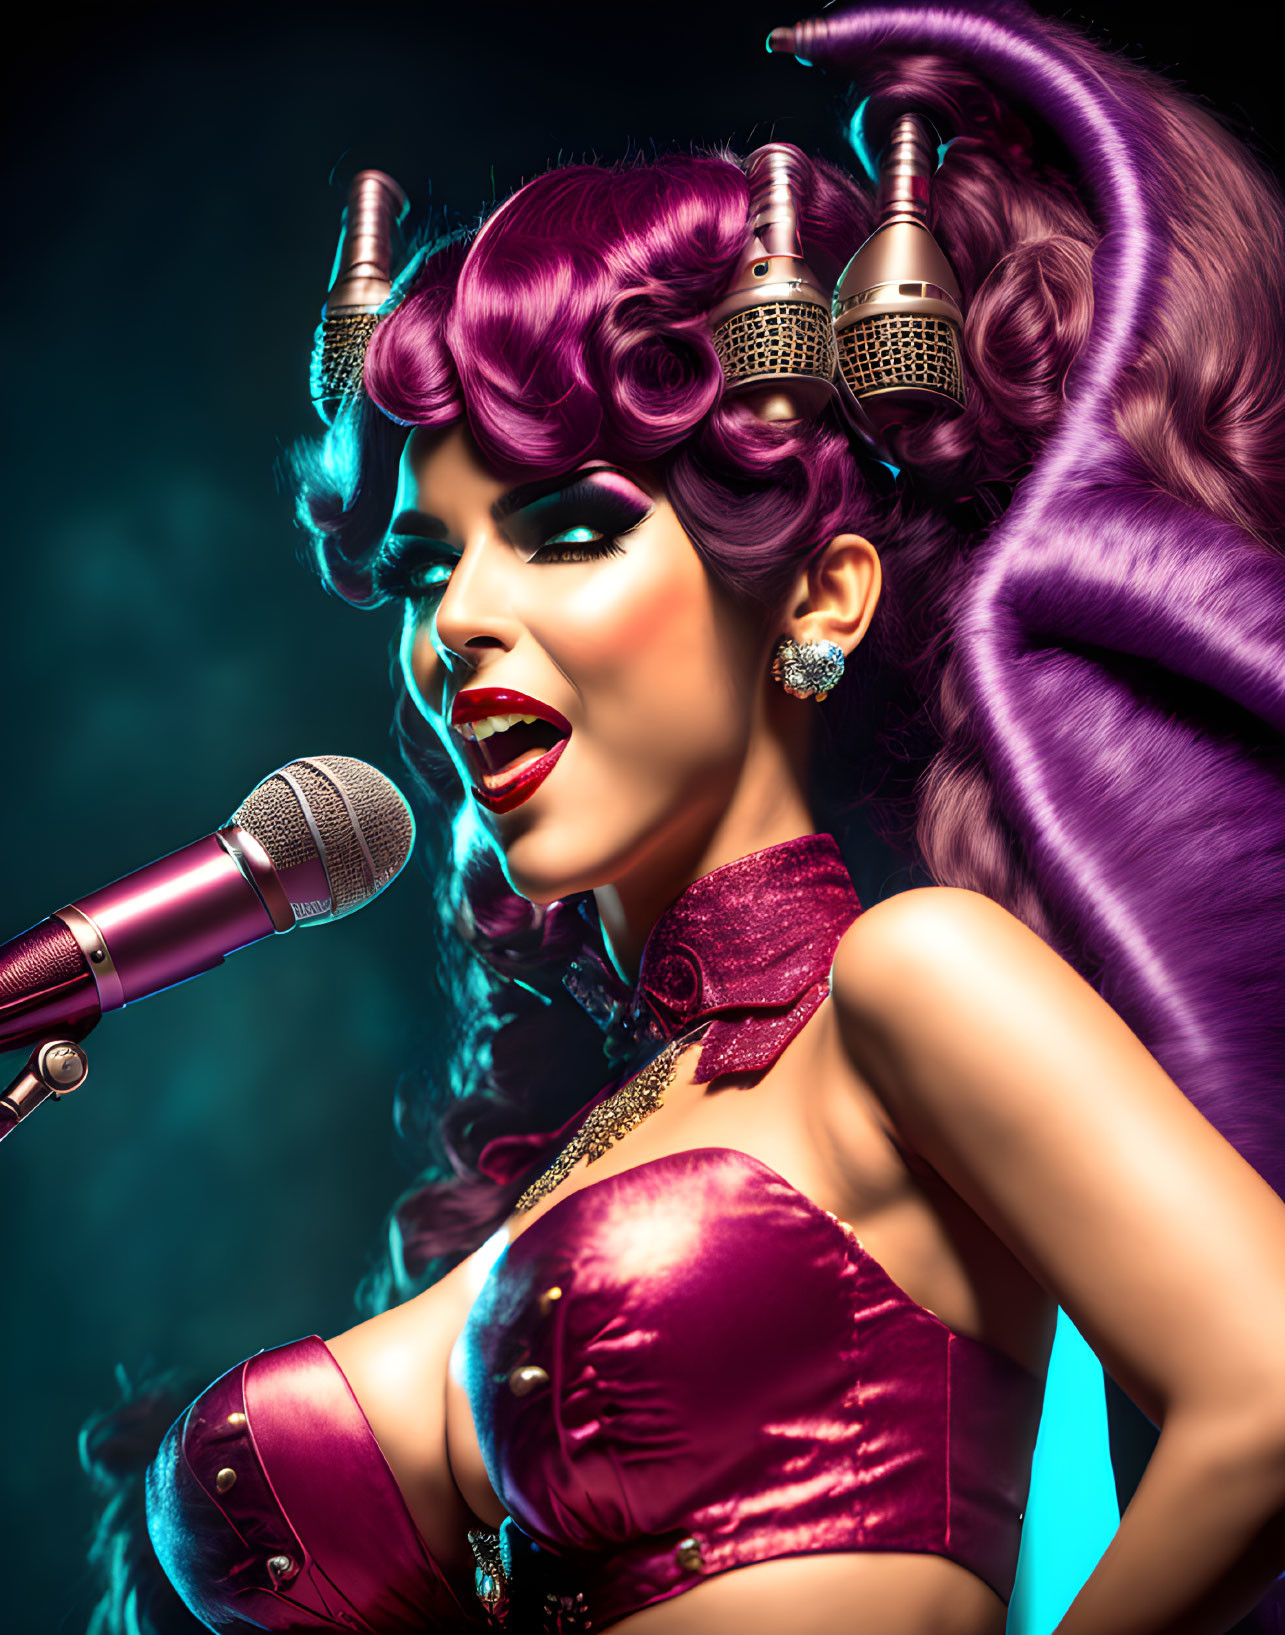 Purple-haired female singer winks with retro microphone and horns on teal backdrop